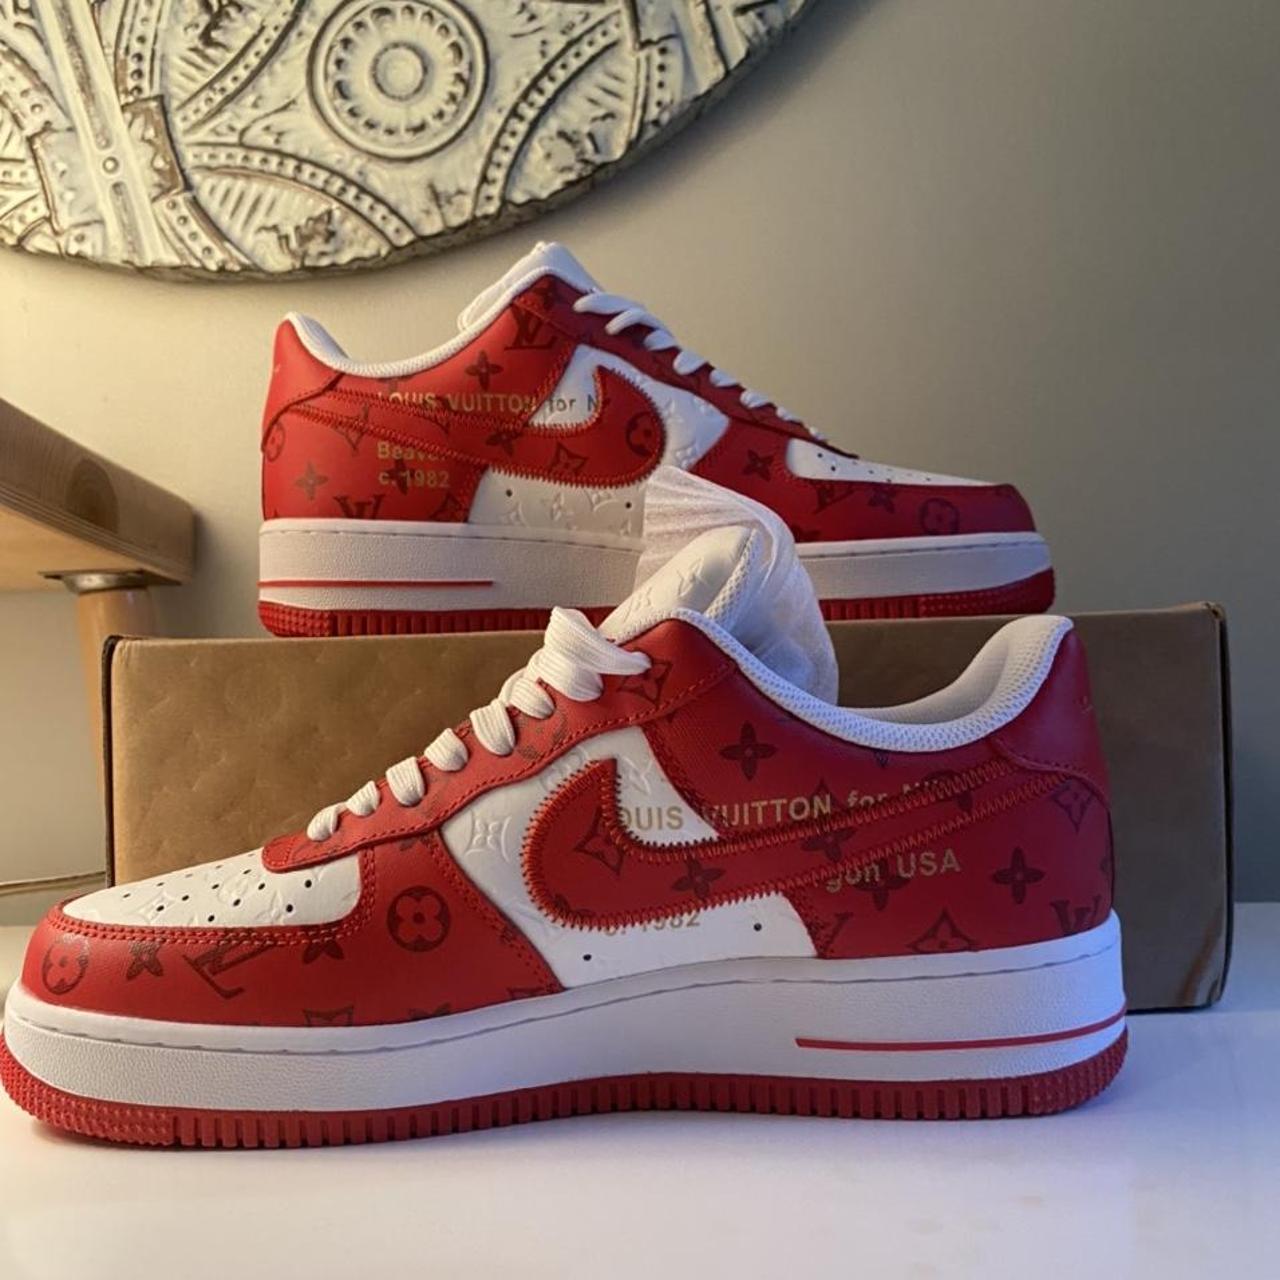 Louis Vuitton off-white Air Force 1 red - Depop